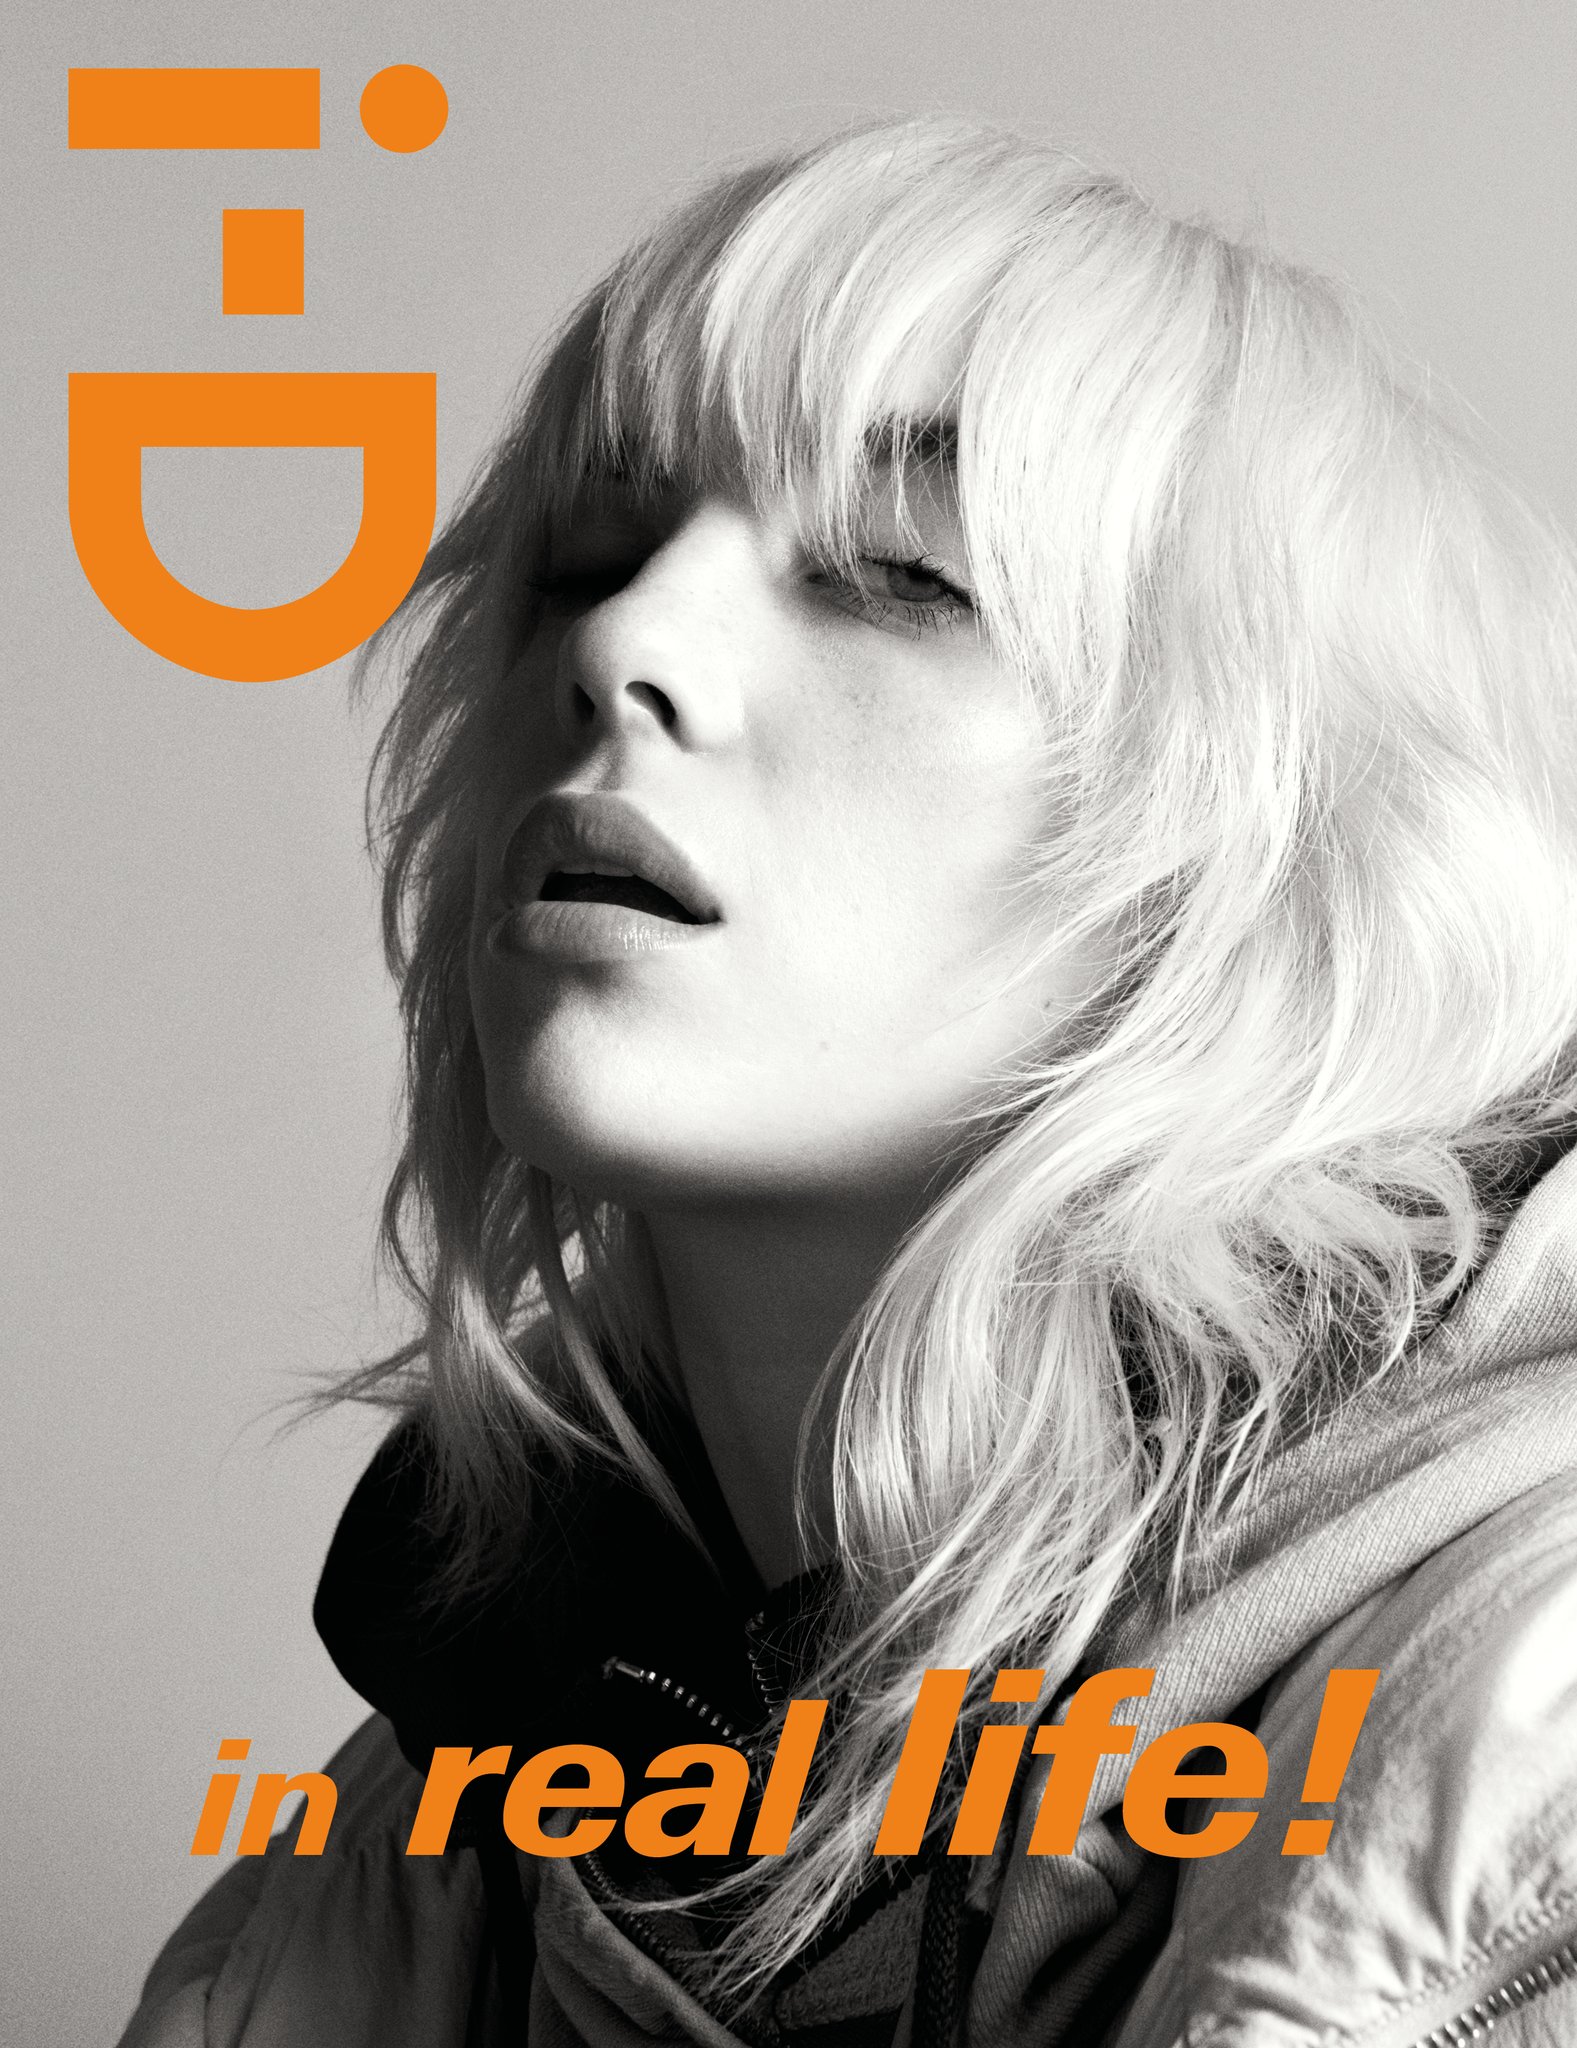 I-D Extraordinary No.364 The In Real Life! Issue